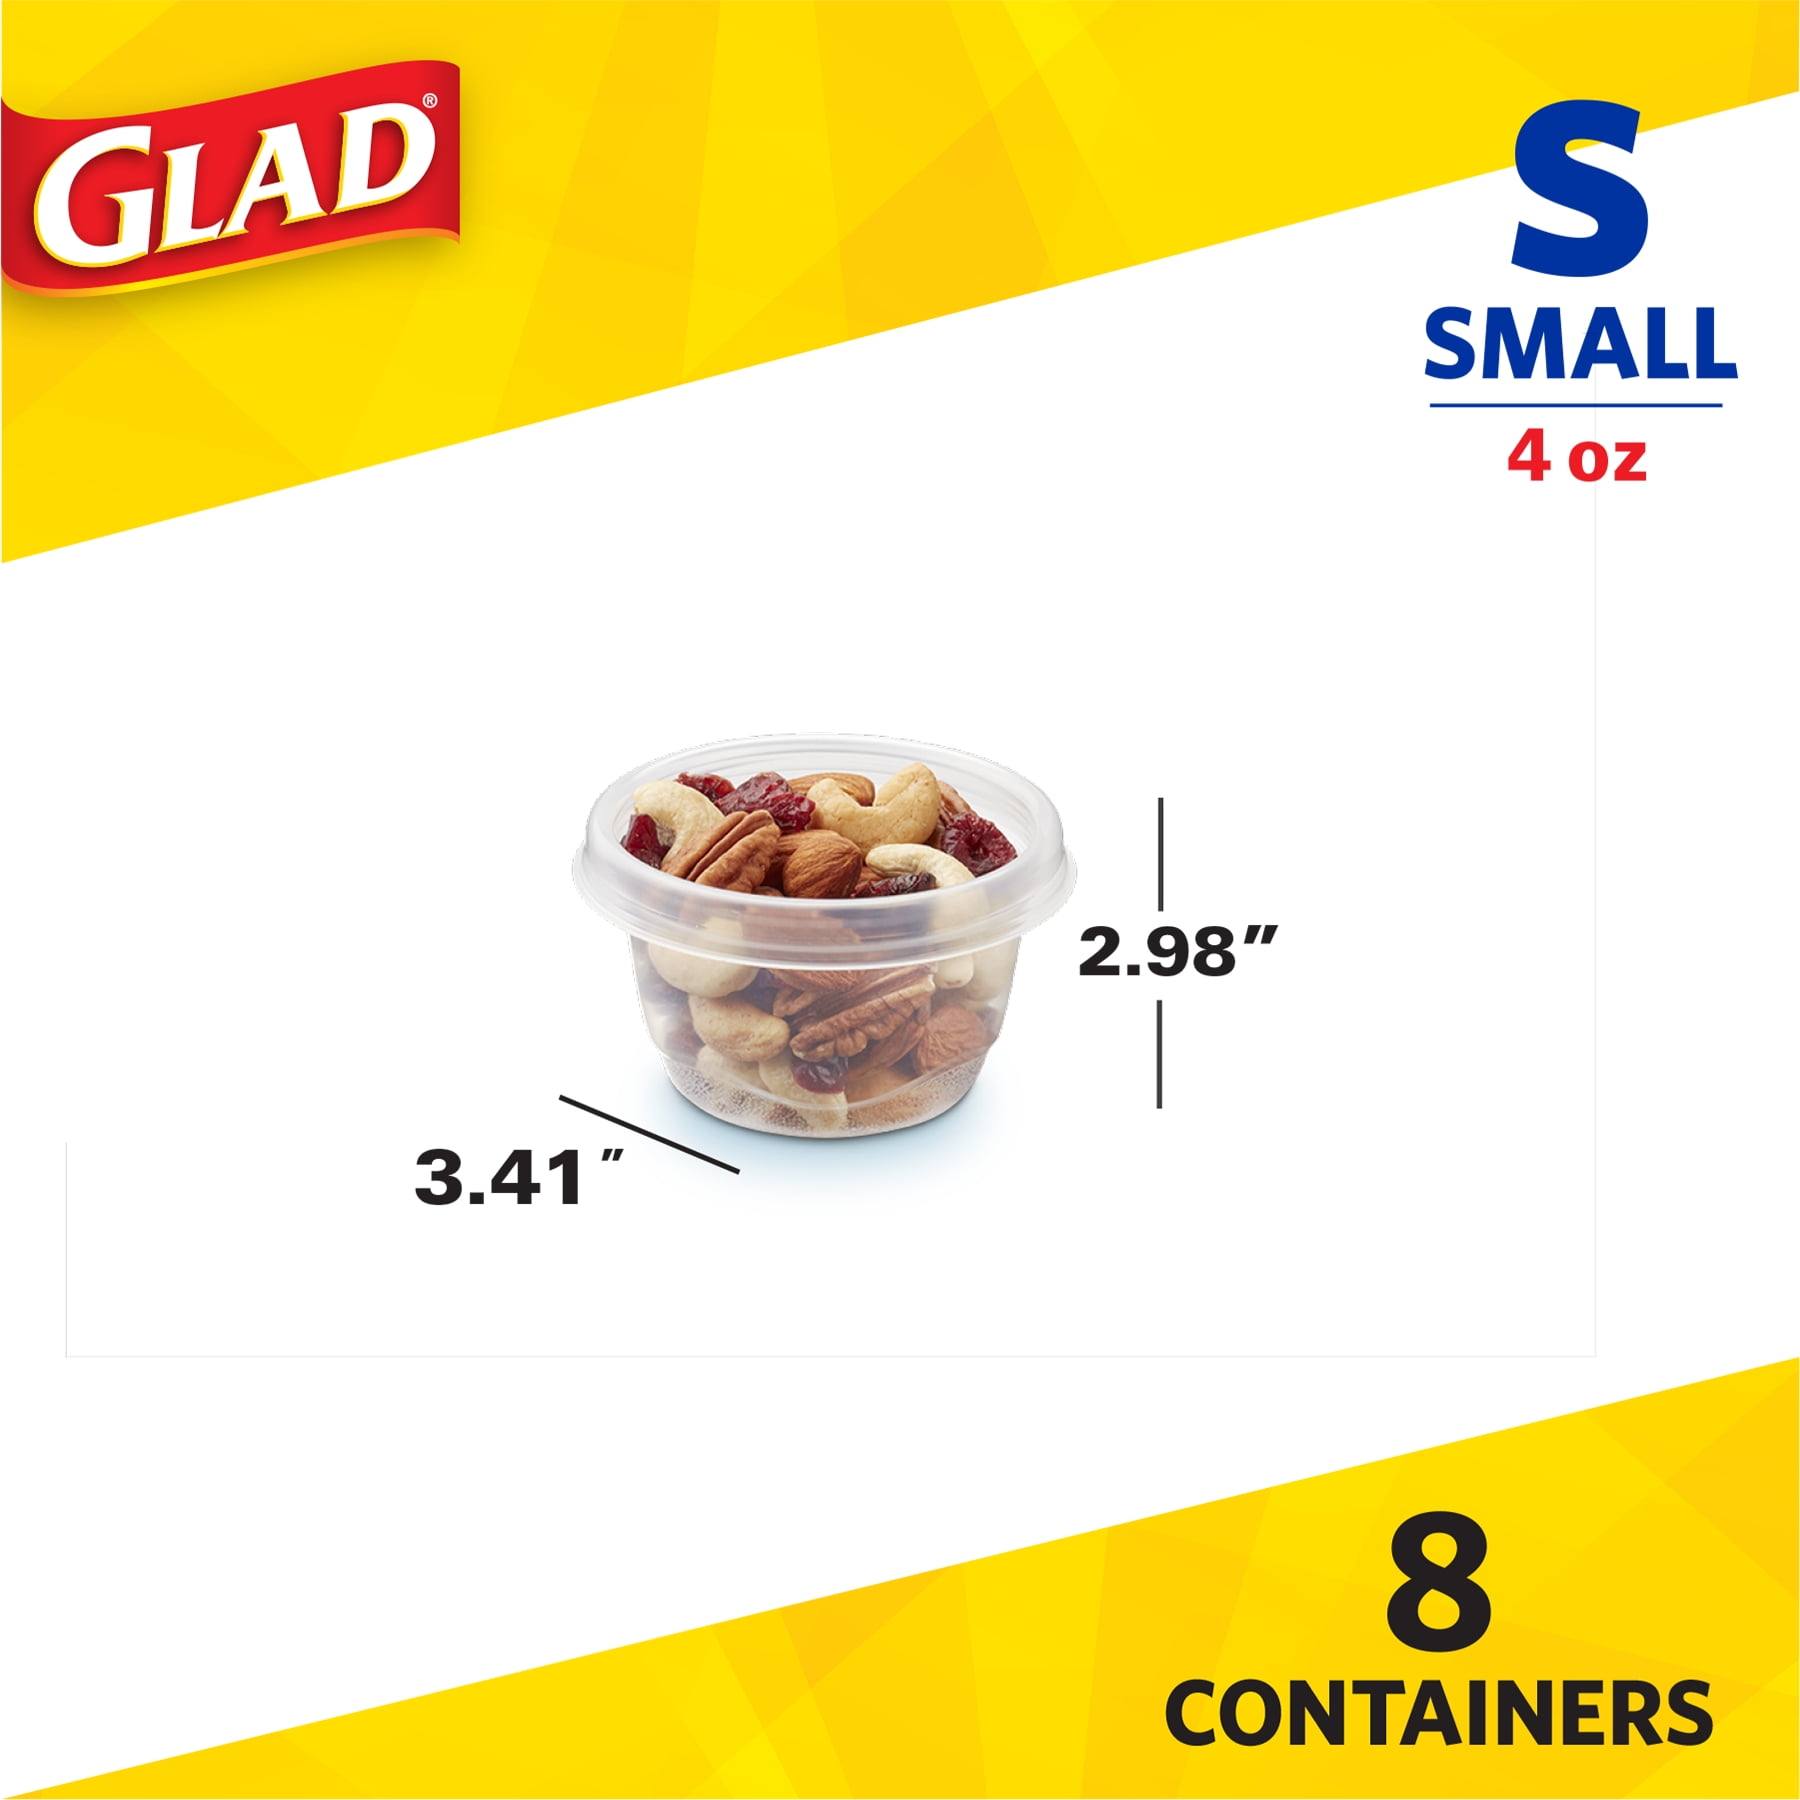 GladWare Holiday Food Storage Containers with Reversible Gift Tags, 5 Count  Medium Square Containers & Lids, 25oz | Microwave-Safe, Freezer-Safe